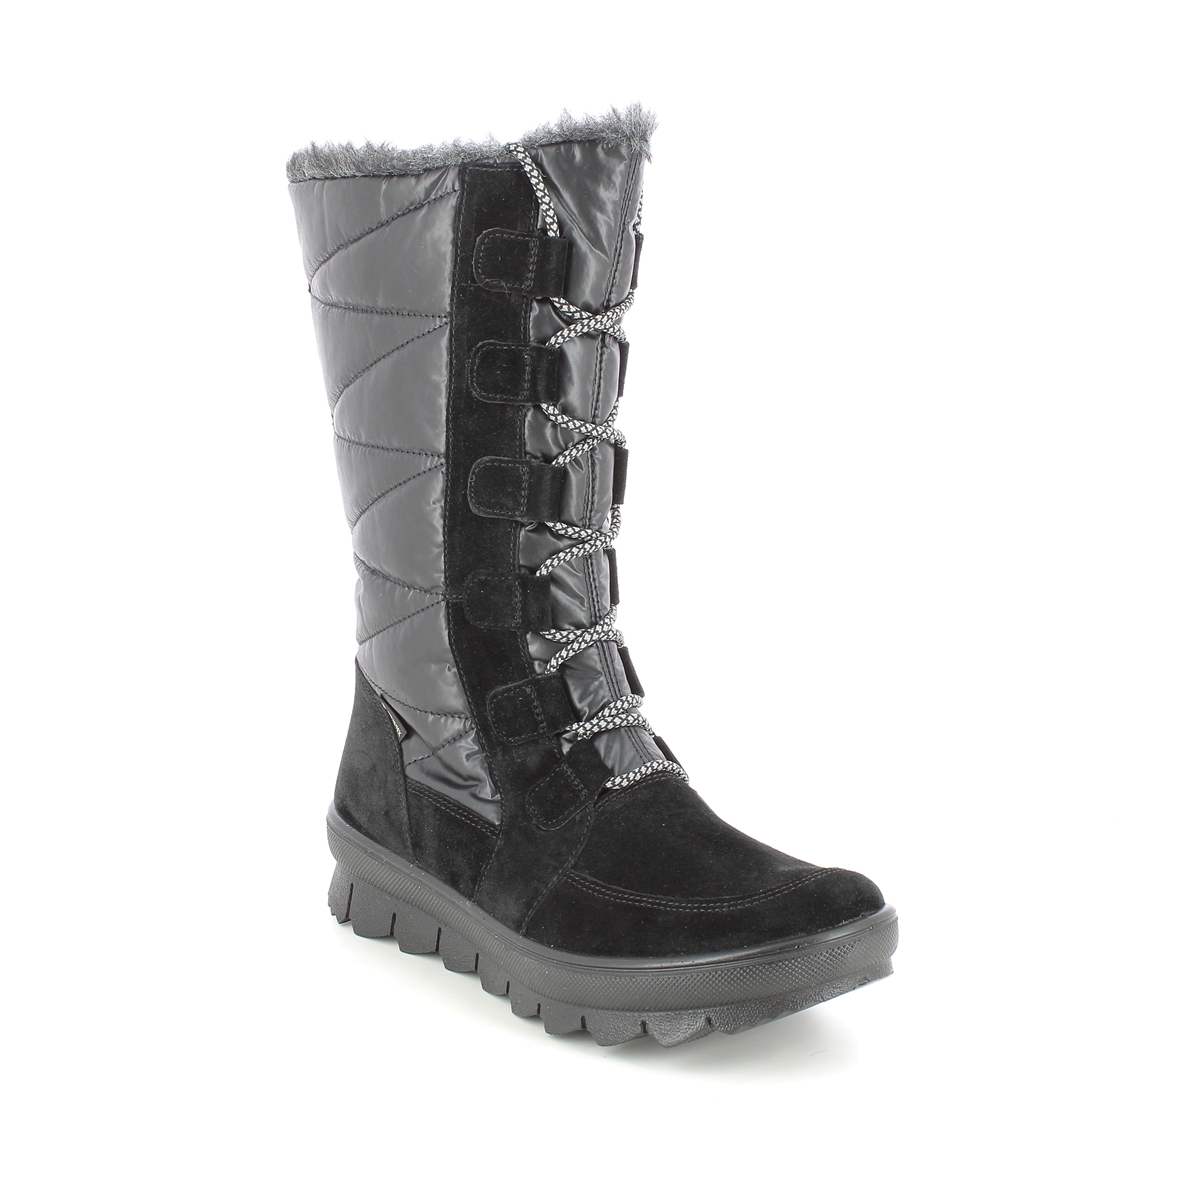 Legero Novara Hi Gtx Black suede Womens Mid Calf Boots 2009901-0000 in a Plain Leather and Man-made in Size 3.5